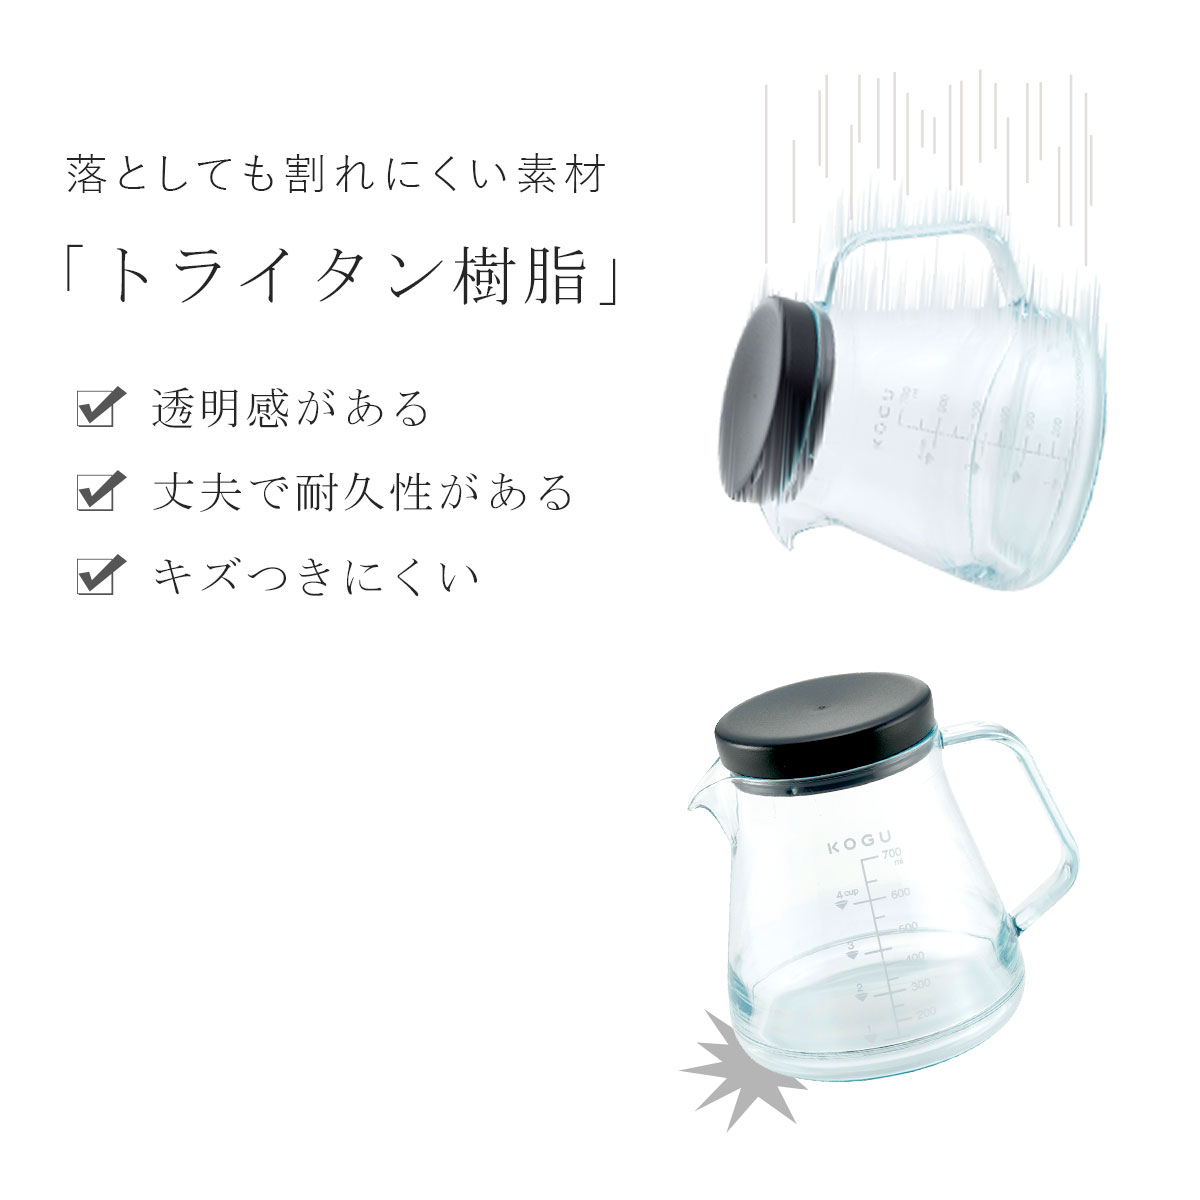 .... crack difficult server 700ml coffee server made in Japan light weight clear drip server crack not light camp outdoor microwave oven possible dishwasher correspondence 